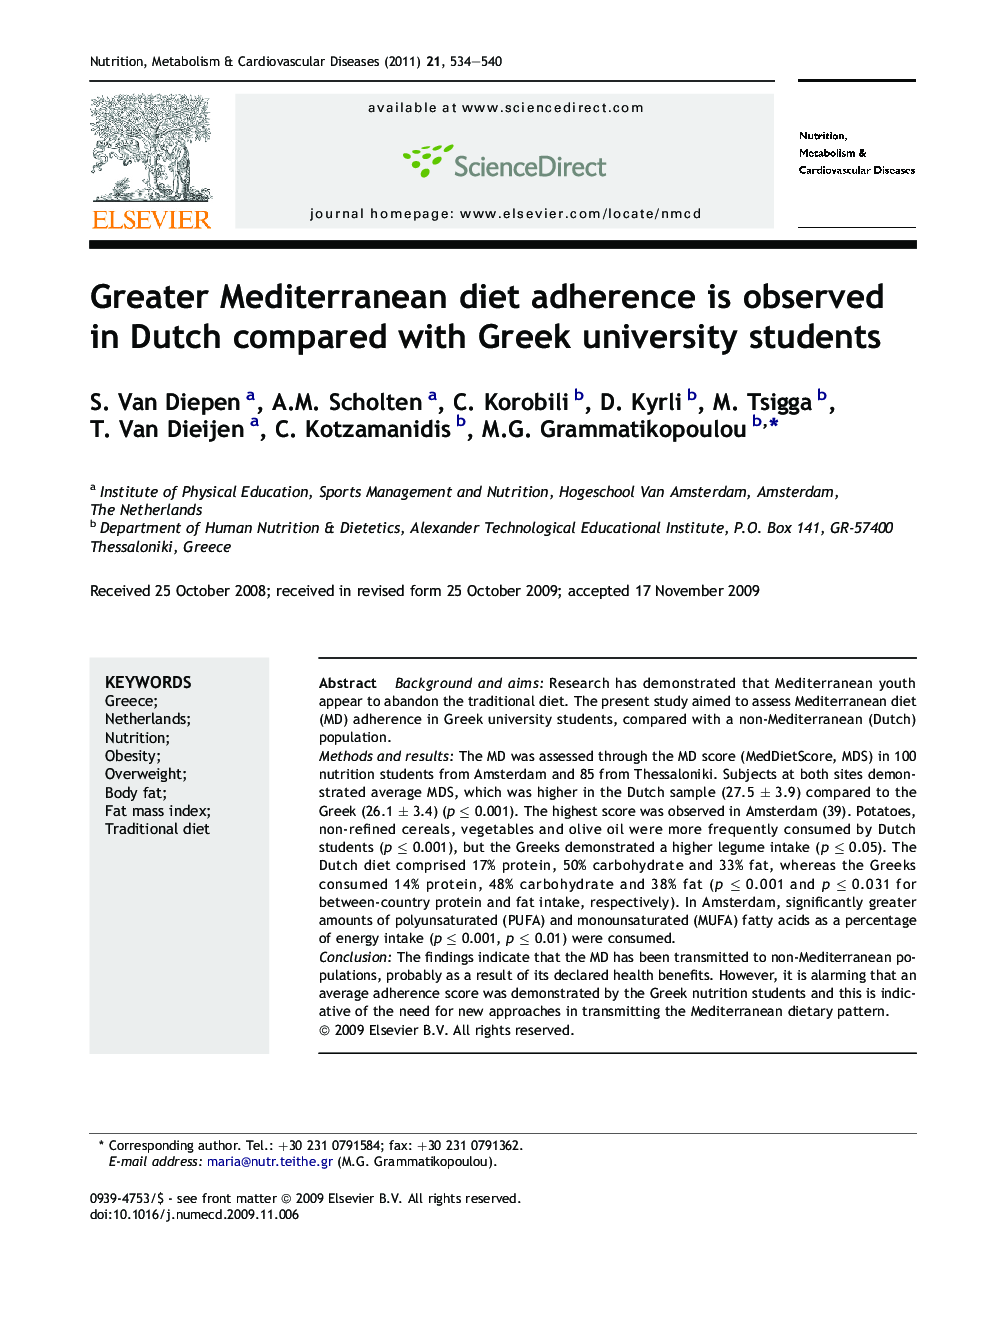 Greater Mediterranean diet adherence is observed in Dutch compared with Greek university students